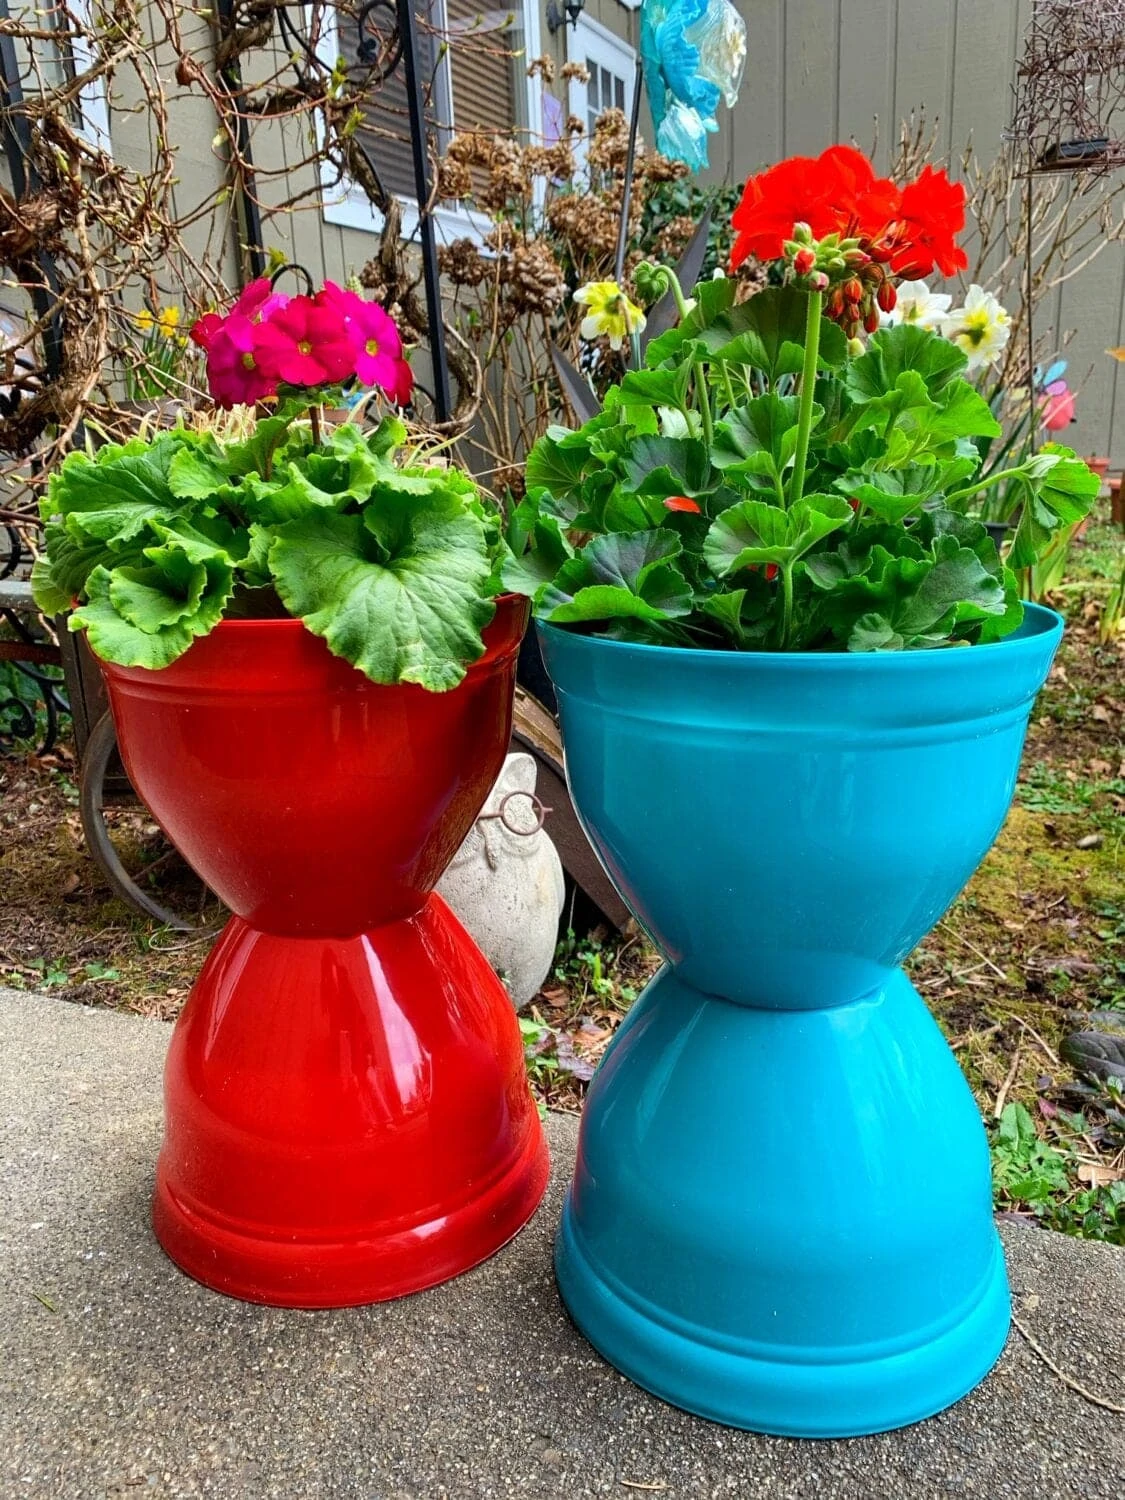 thrifty find: GARDEN GROW BAGS FROM DOLLAR TREE - CREATIVE CAIN CABIN